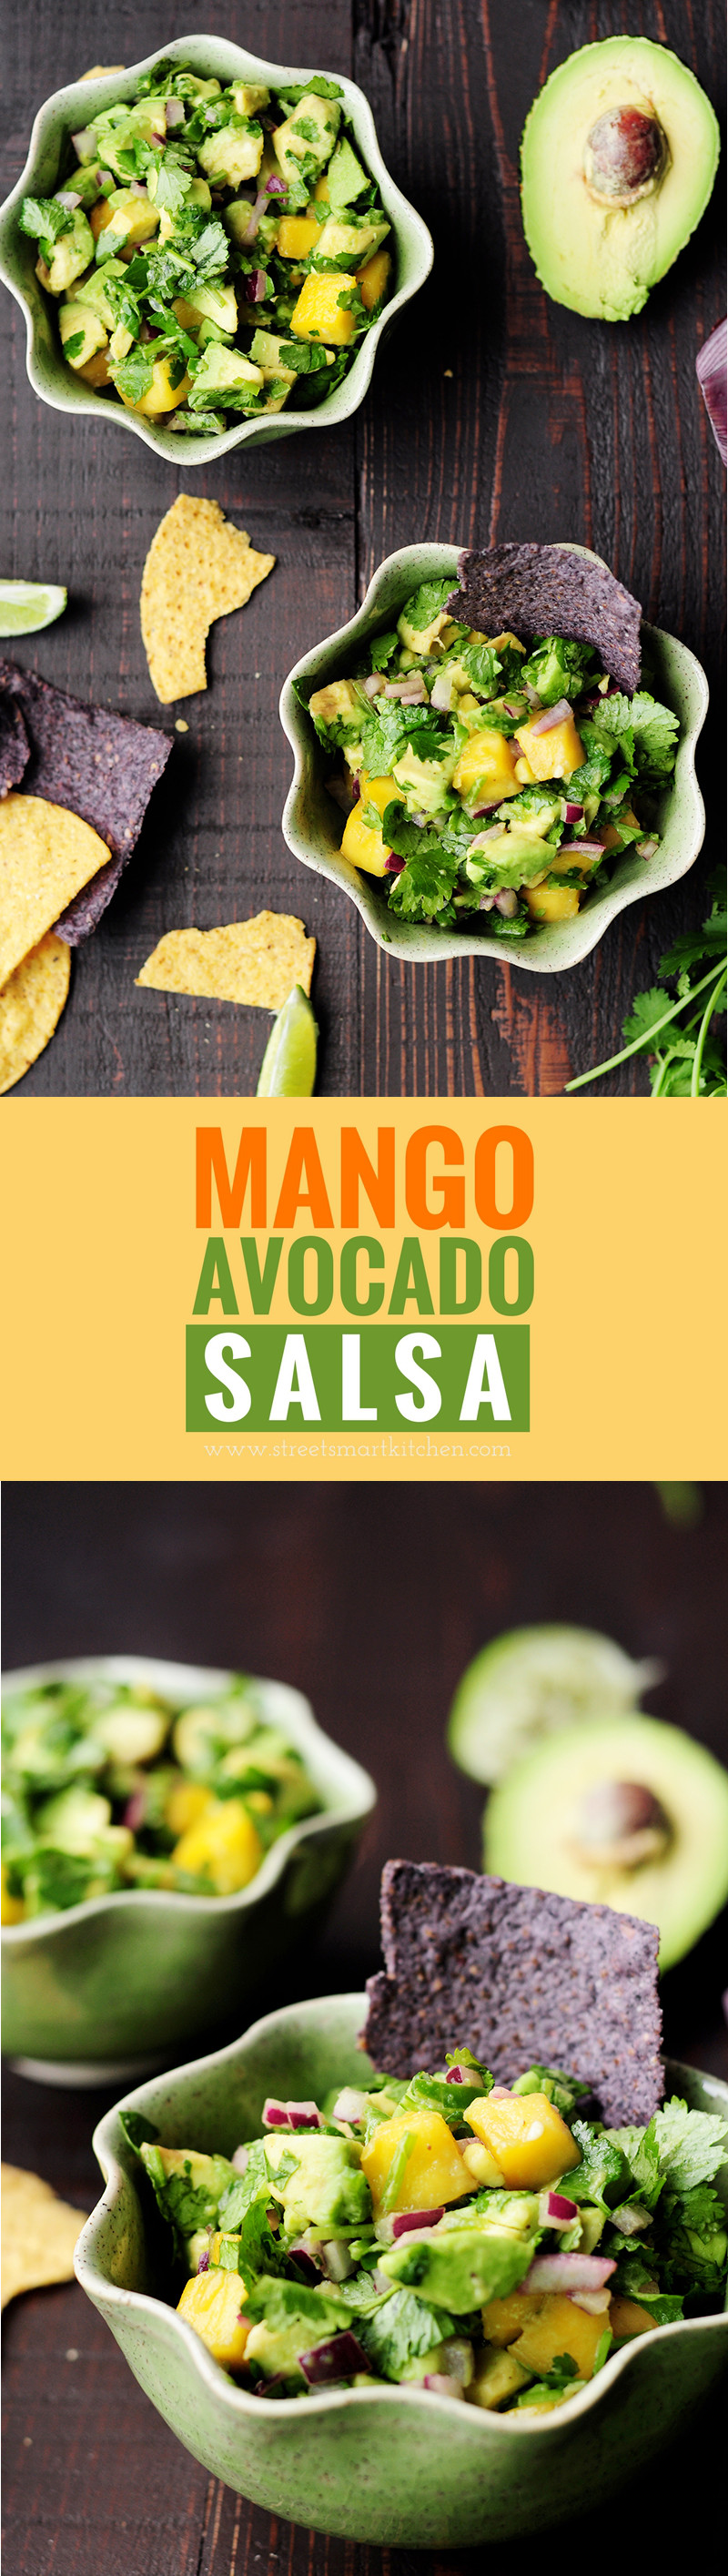 Refreshingly tasty mango avocado salsa that's a crowd-pleasing snack or appetizer with tortilla chips and it's amazing as a topping for seafood.